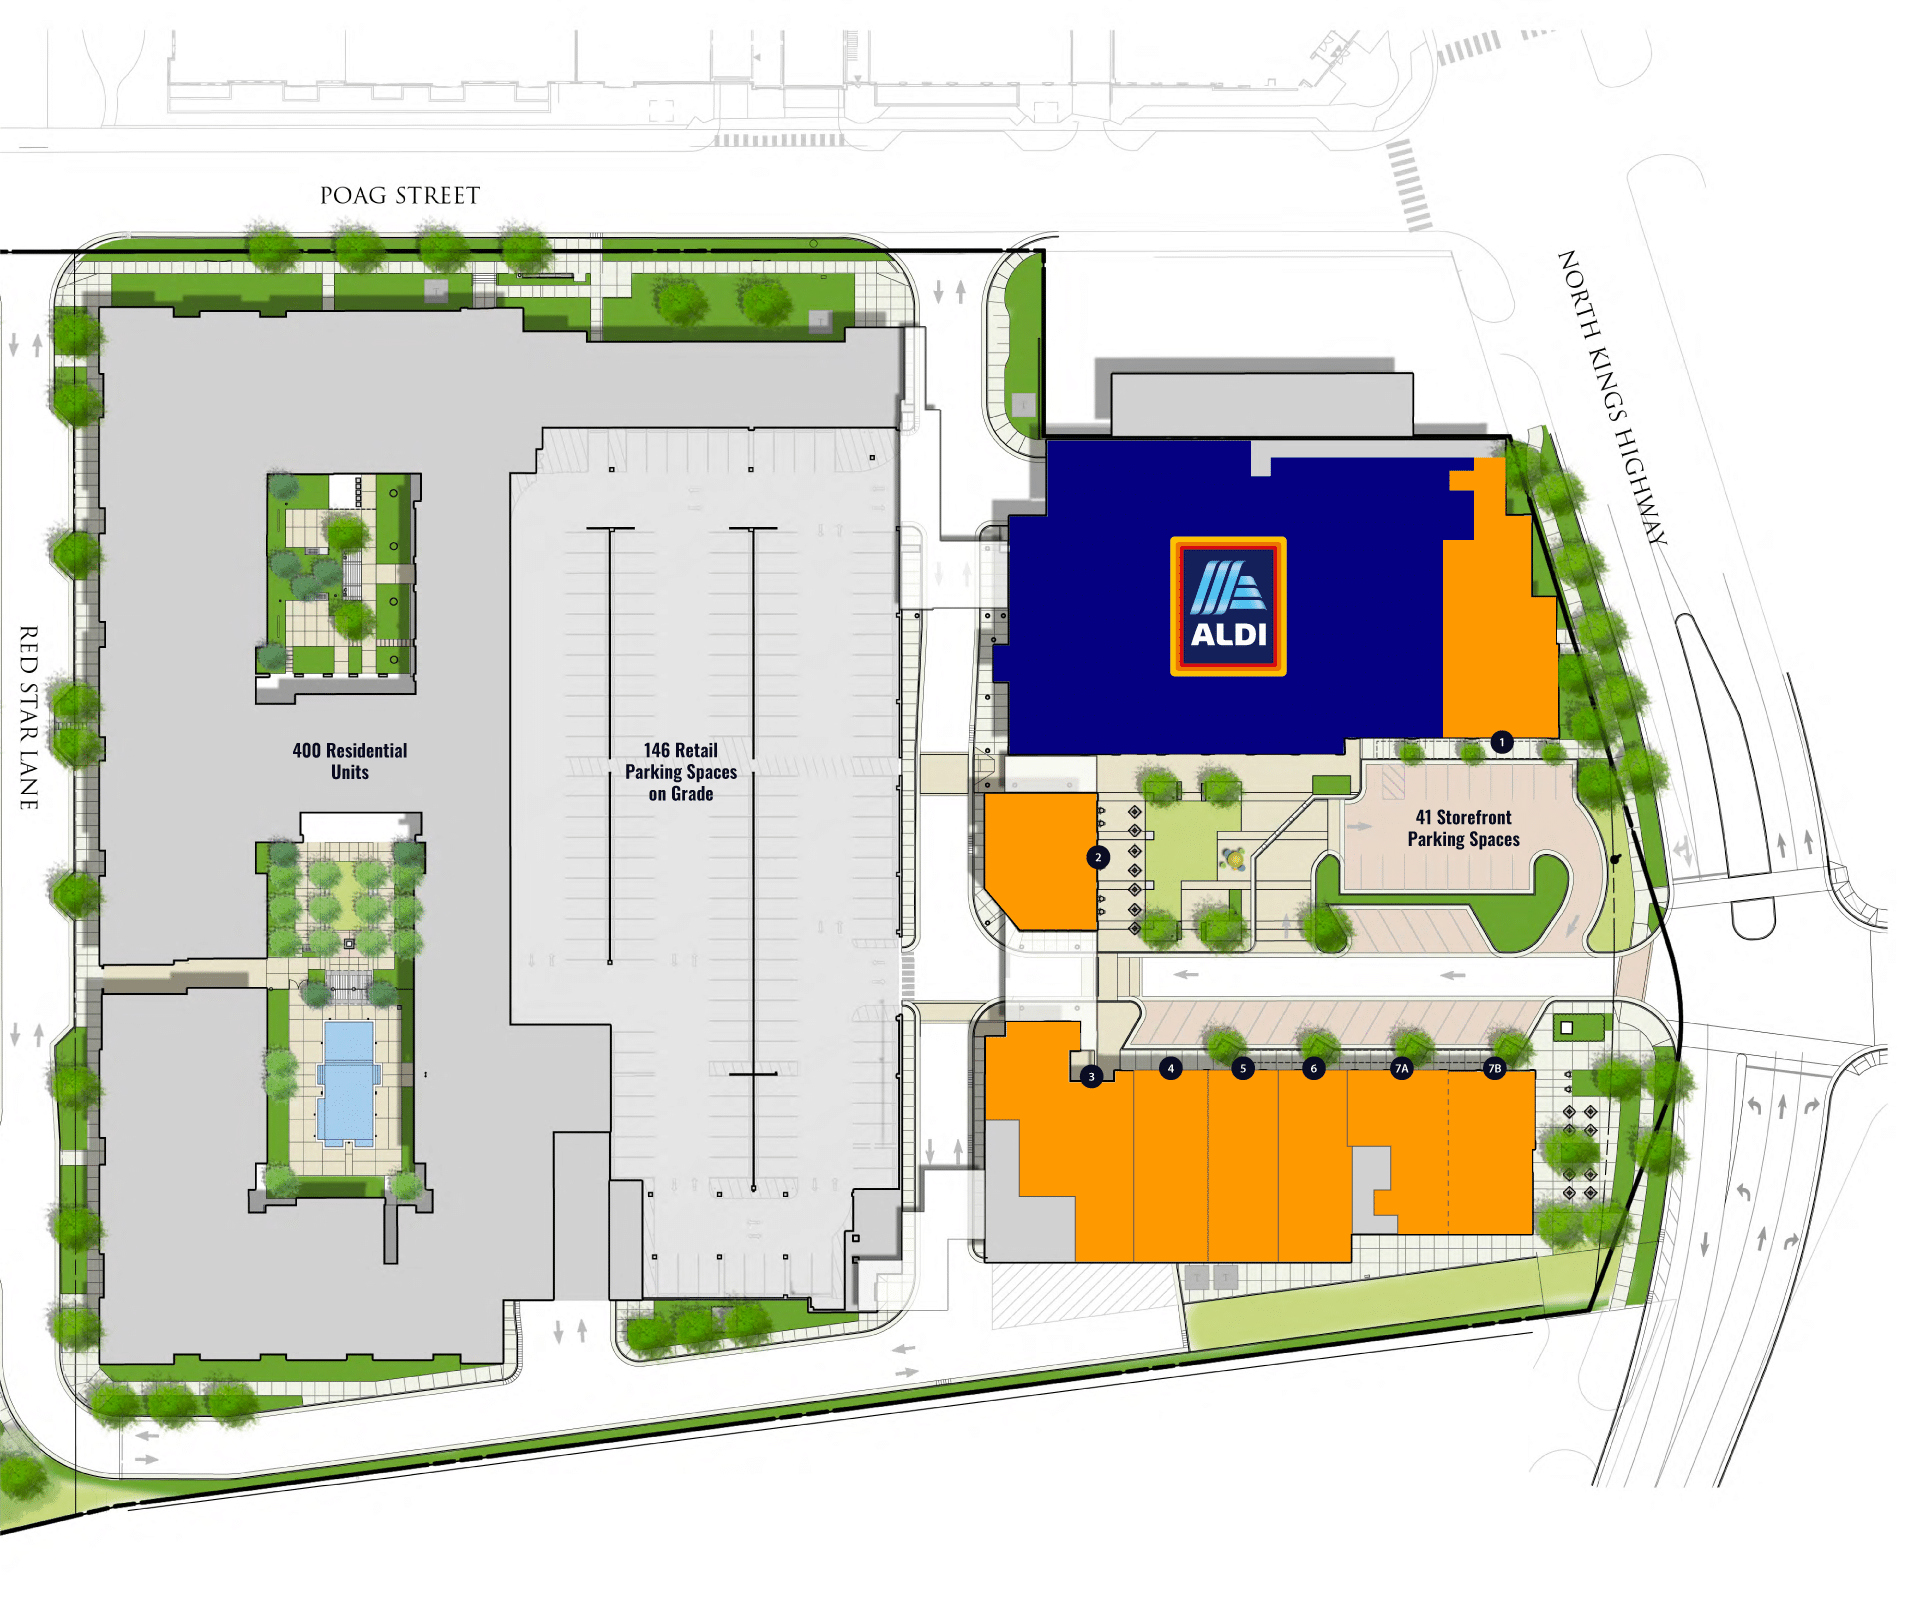 retail plan showing available space - alexandria va apartments south alex